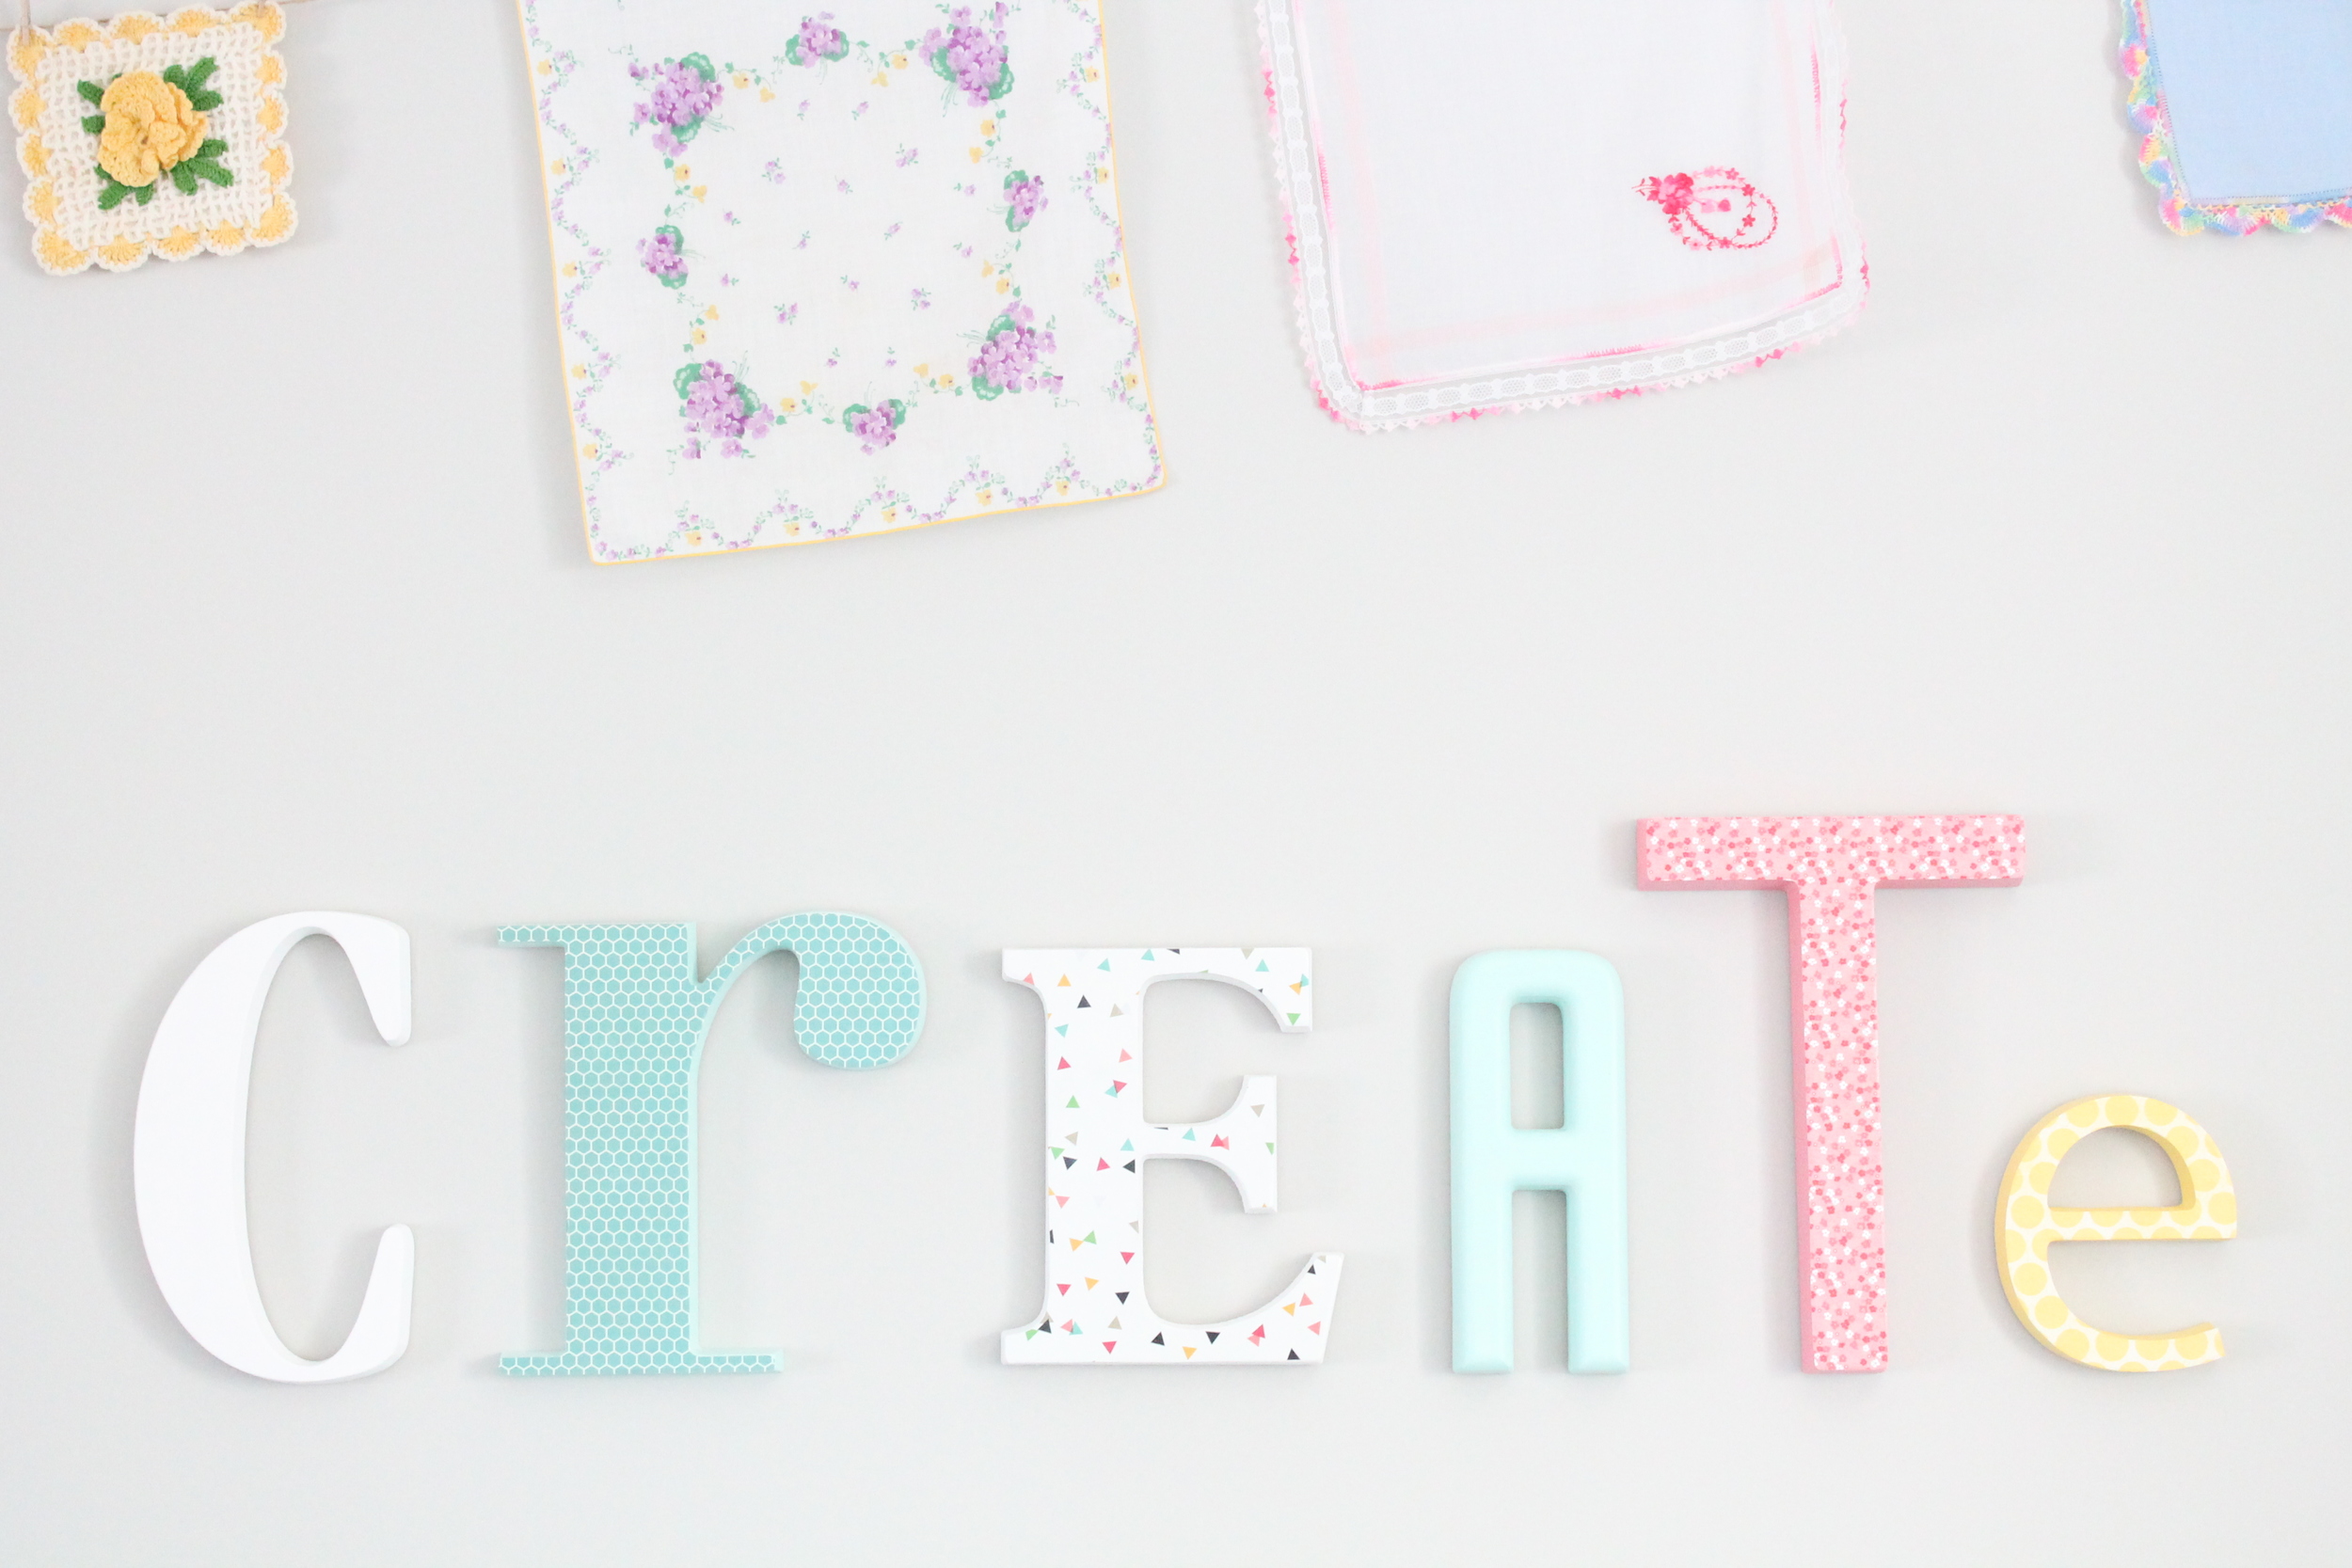 DIY letters for the family craft room. Painted each letter a different color and covered some with scrapbook paper.